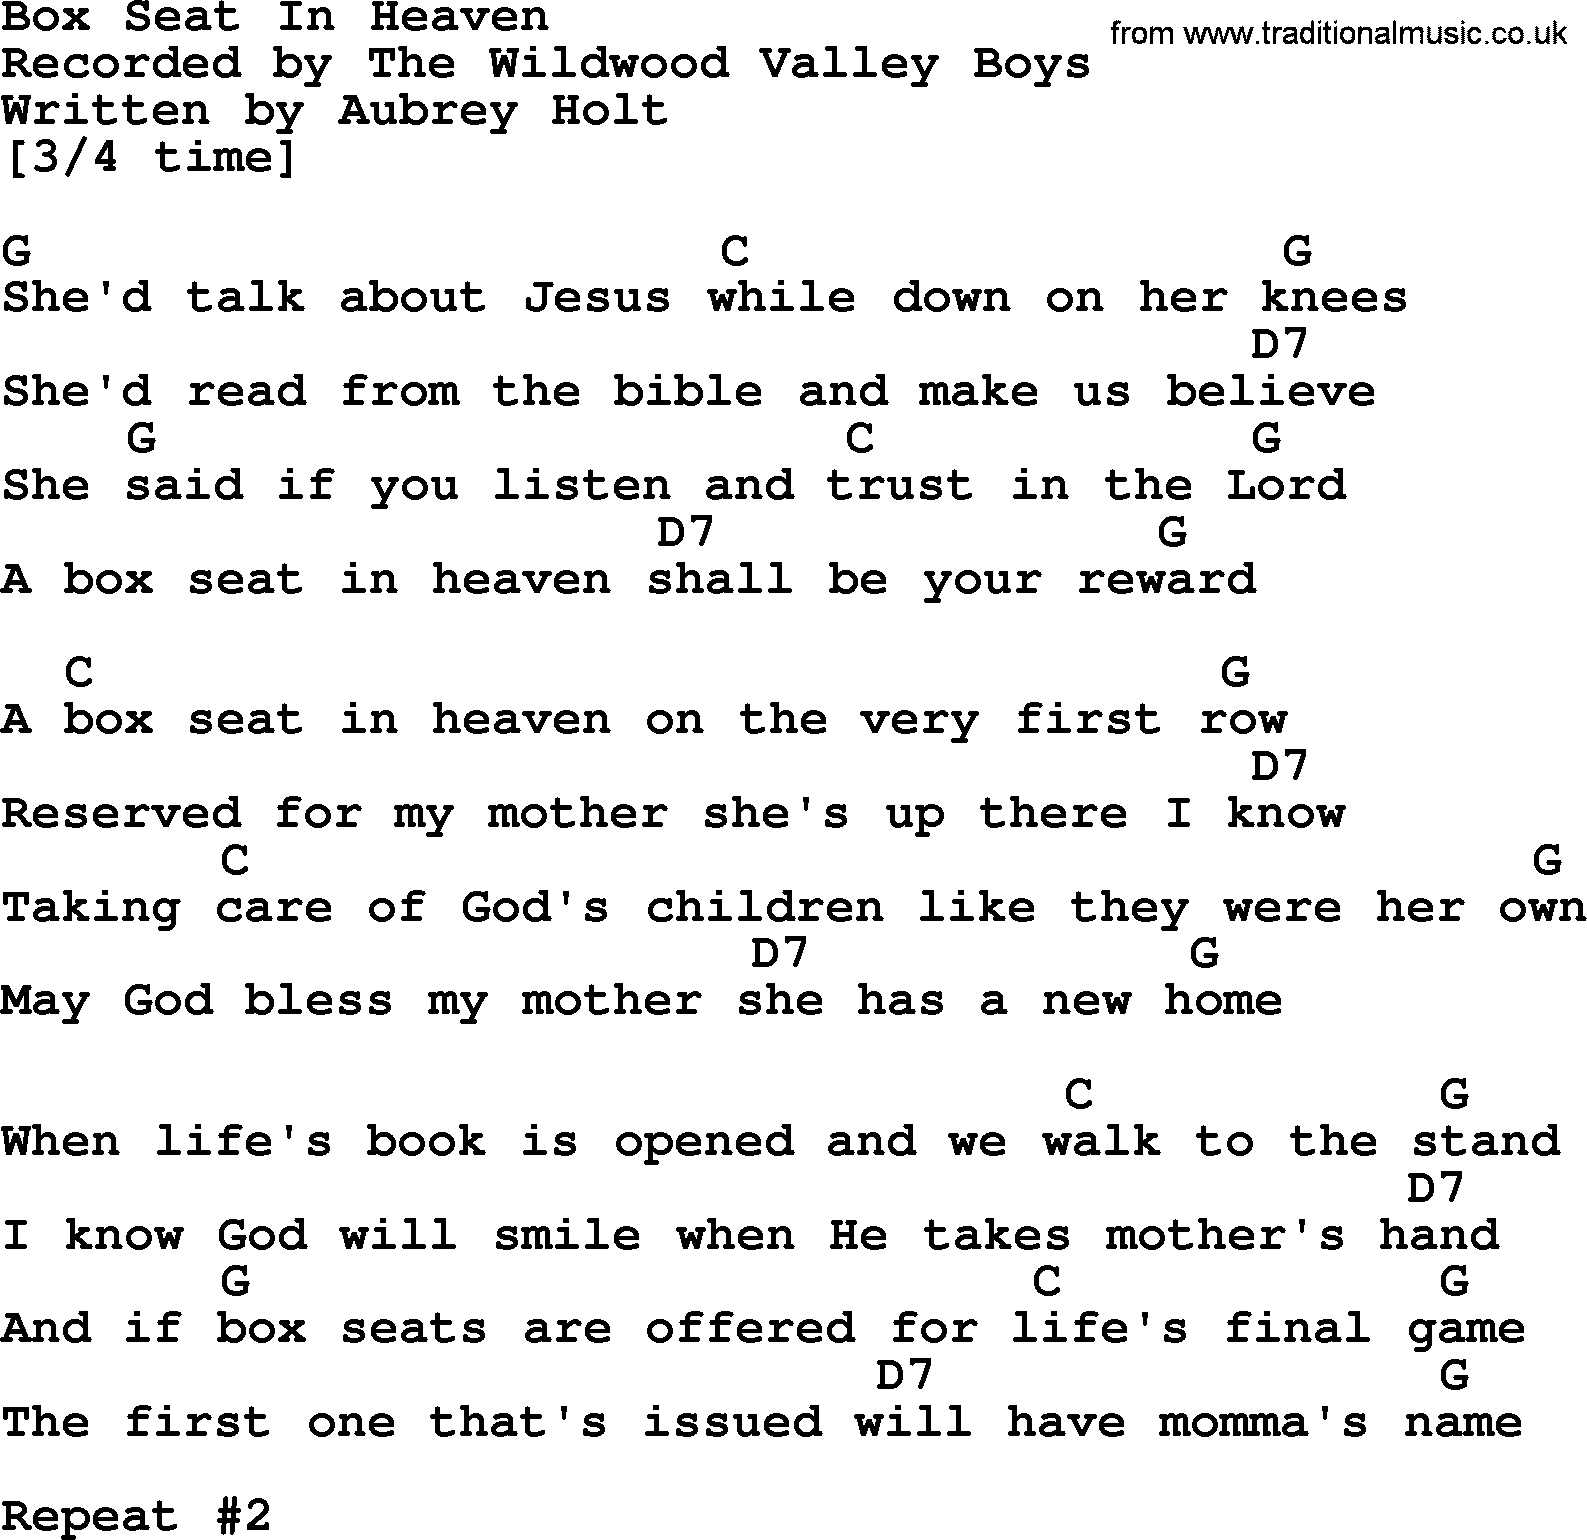 Box Seat In Heaven - Bluegrass lyrics with chords